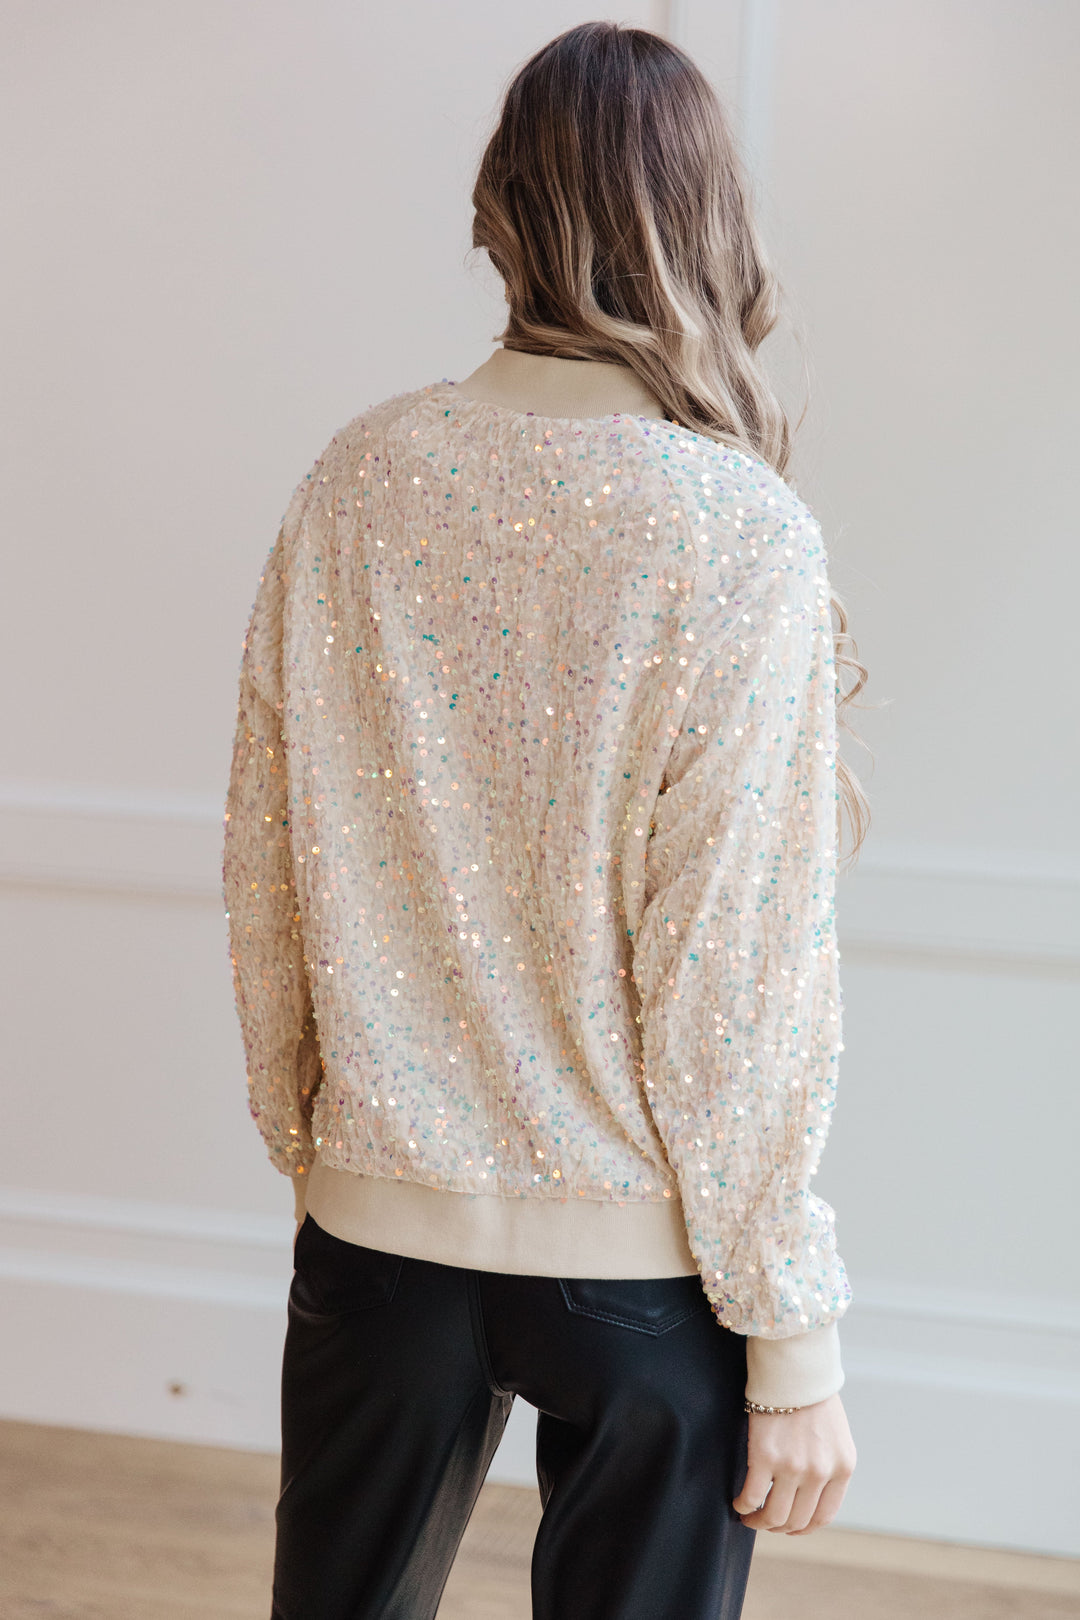 Glitter Bomb Sequin Bomber Jacket-220 Beauty/Gift-Inspired by Justeen-Women's Clothing Boutique in Chicago, Illinois